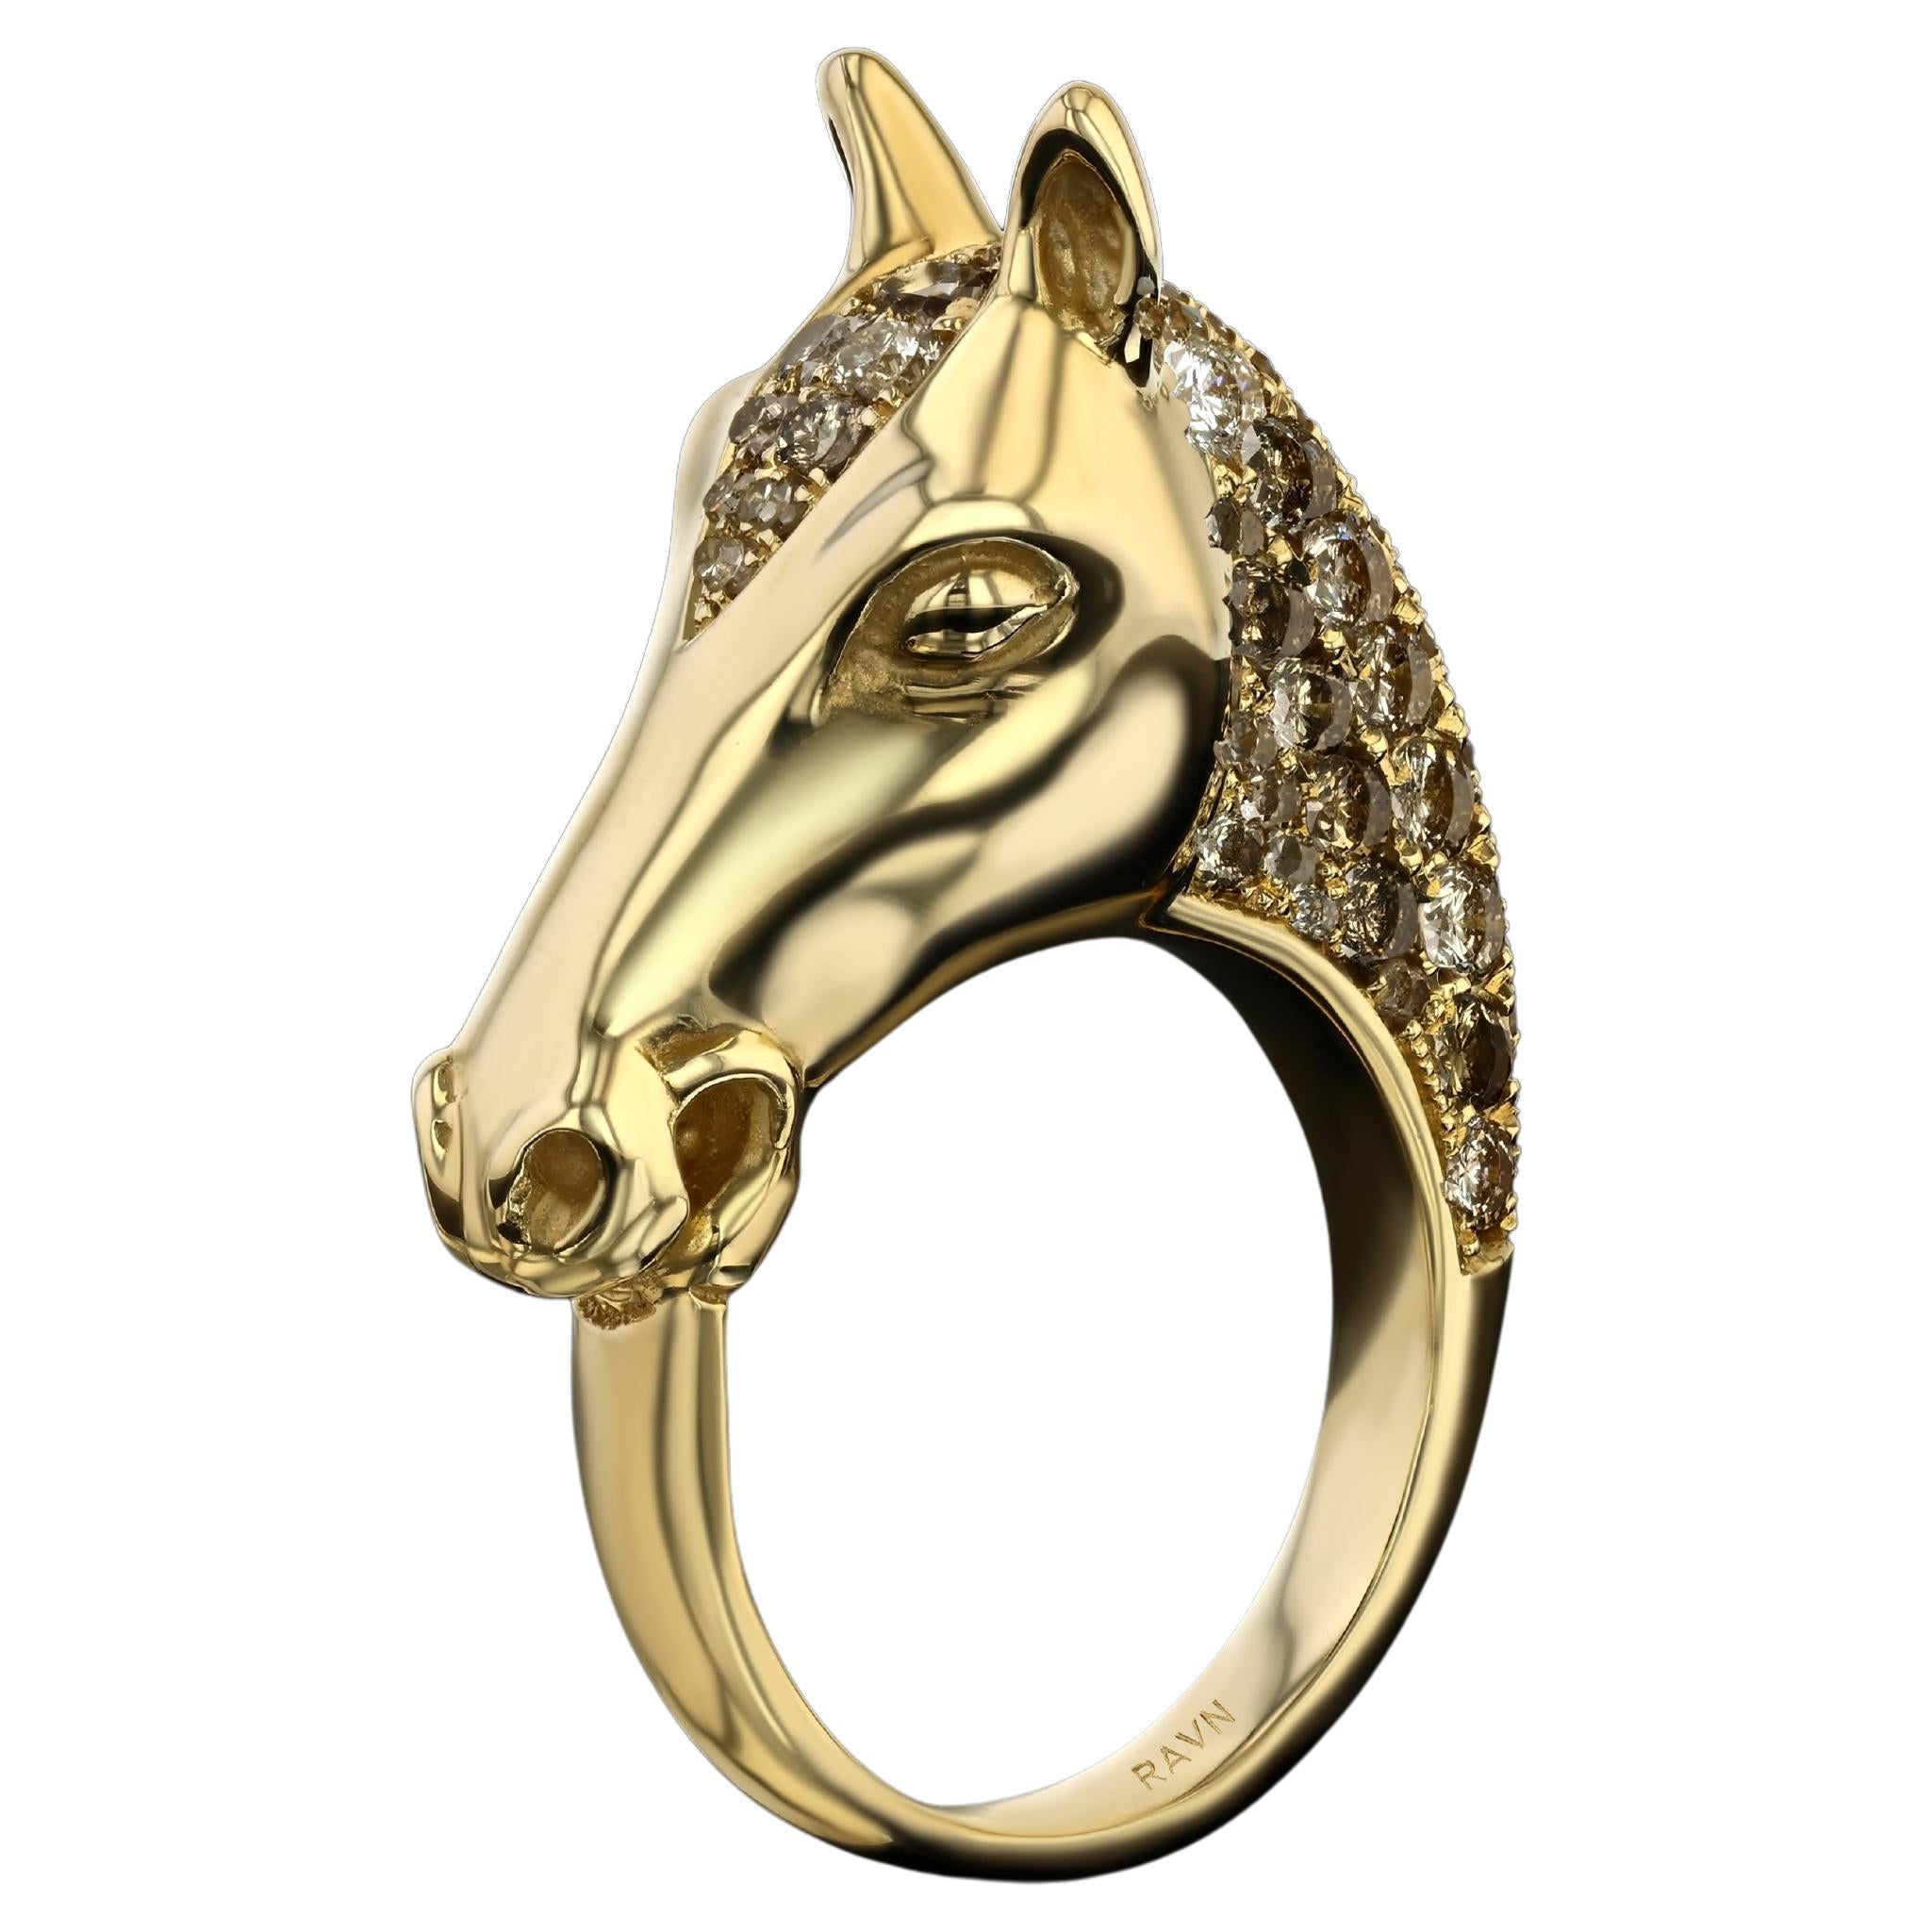 House of RAVN, 18k Solid Gold, Fiala Ring with 62 Diamonds (3.01ct total) For Sale